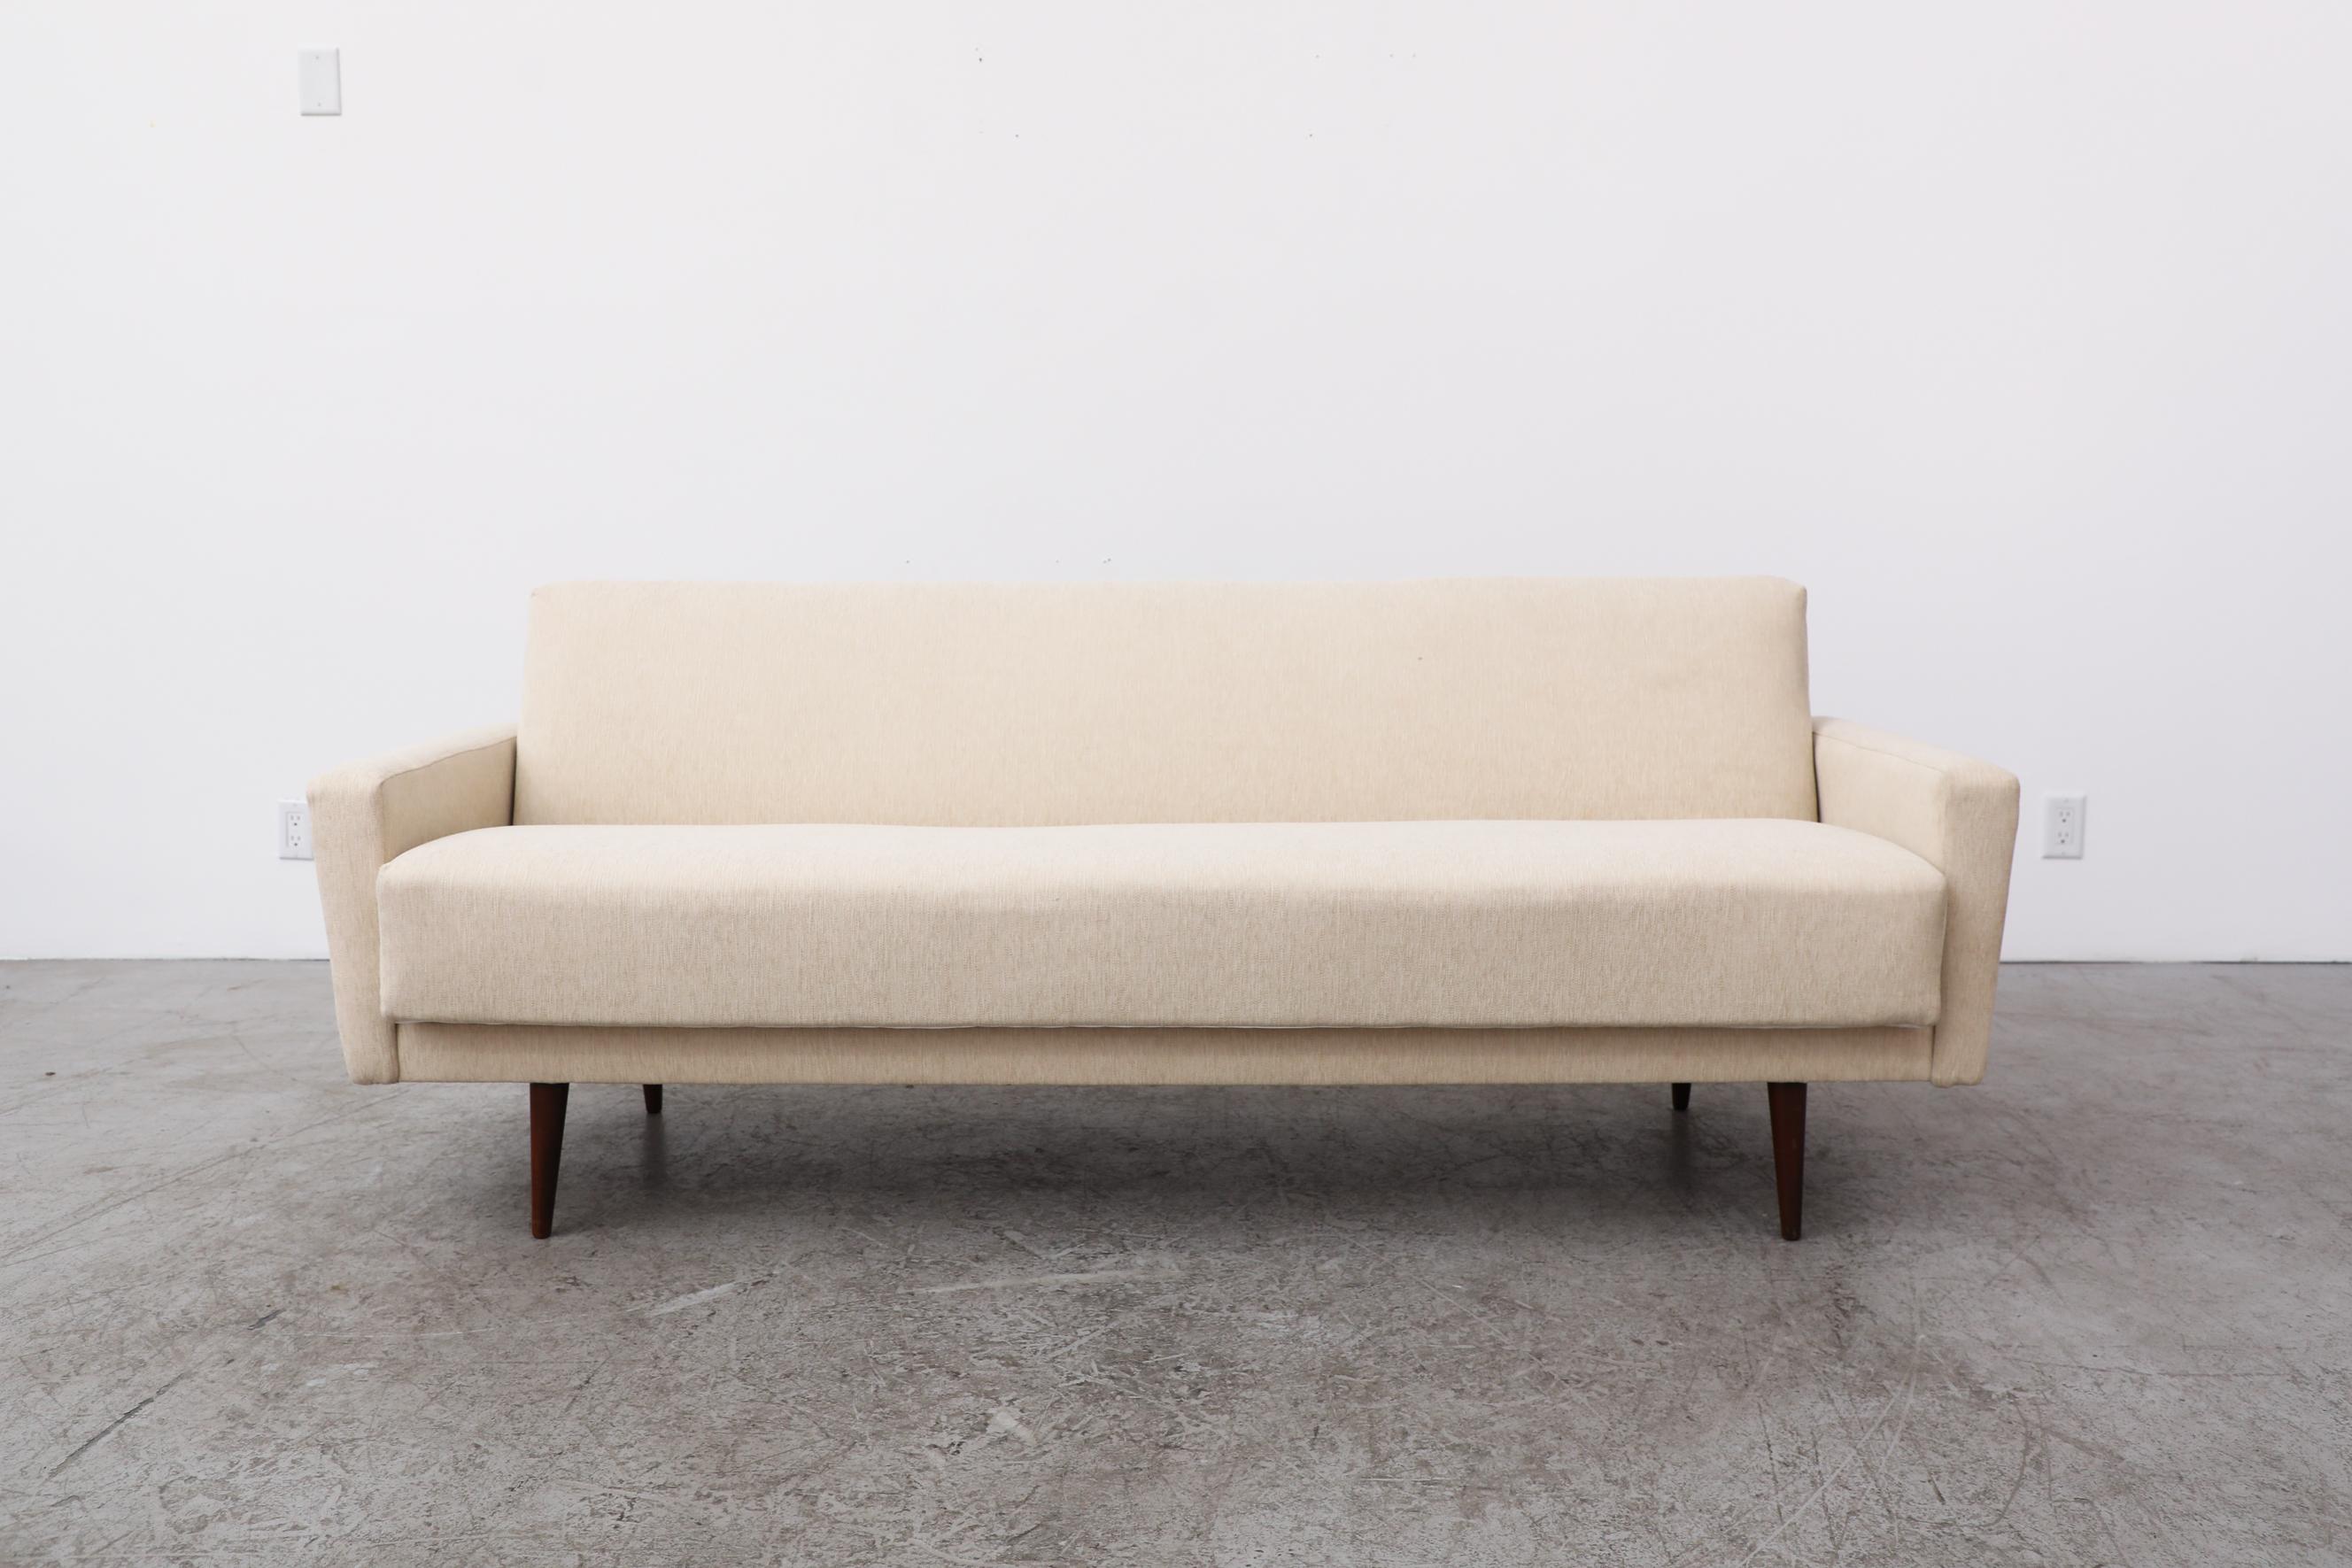 Mid-Century, stylishly boxy, 3 seater sleeper sofa with tapered teak legs and newly upholstered cream fabric. The back folds down to convert from sofa into a bed. Bed measures 78